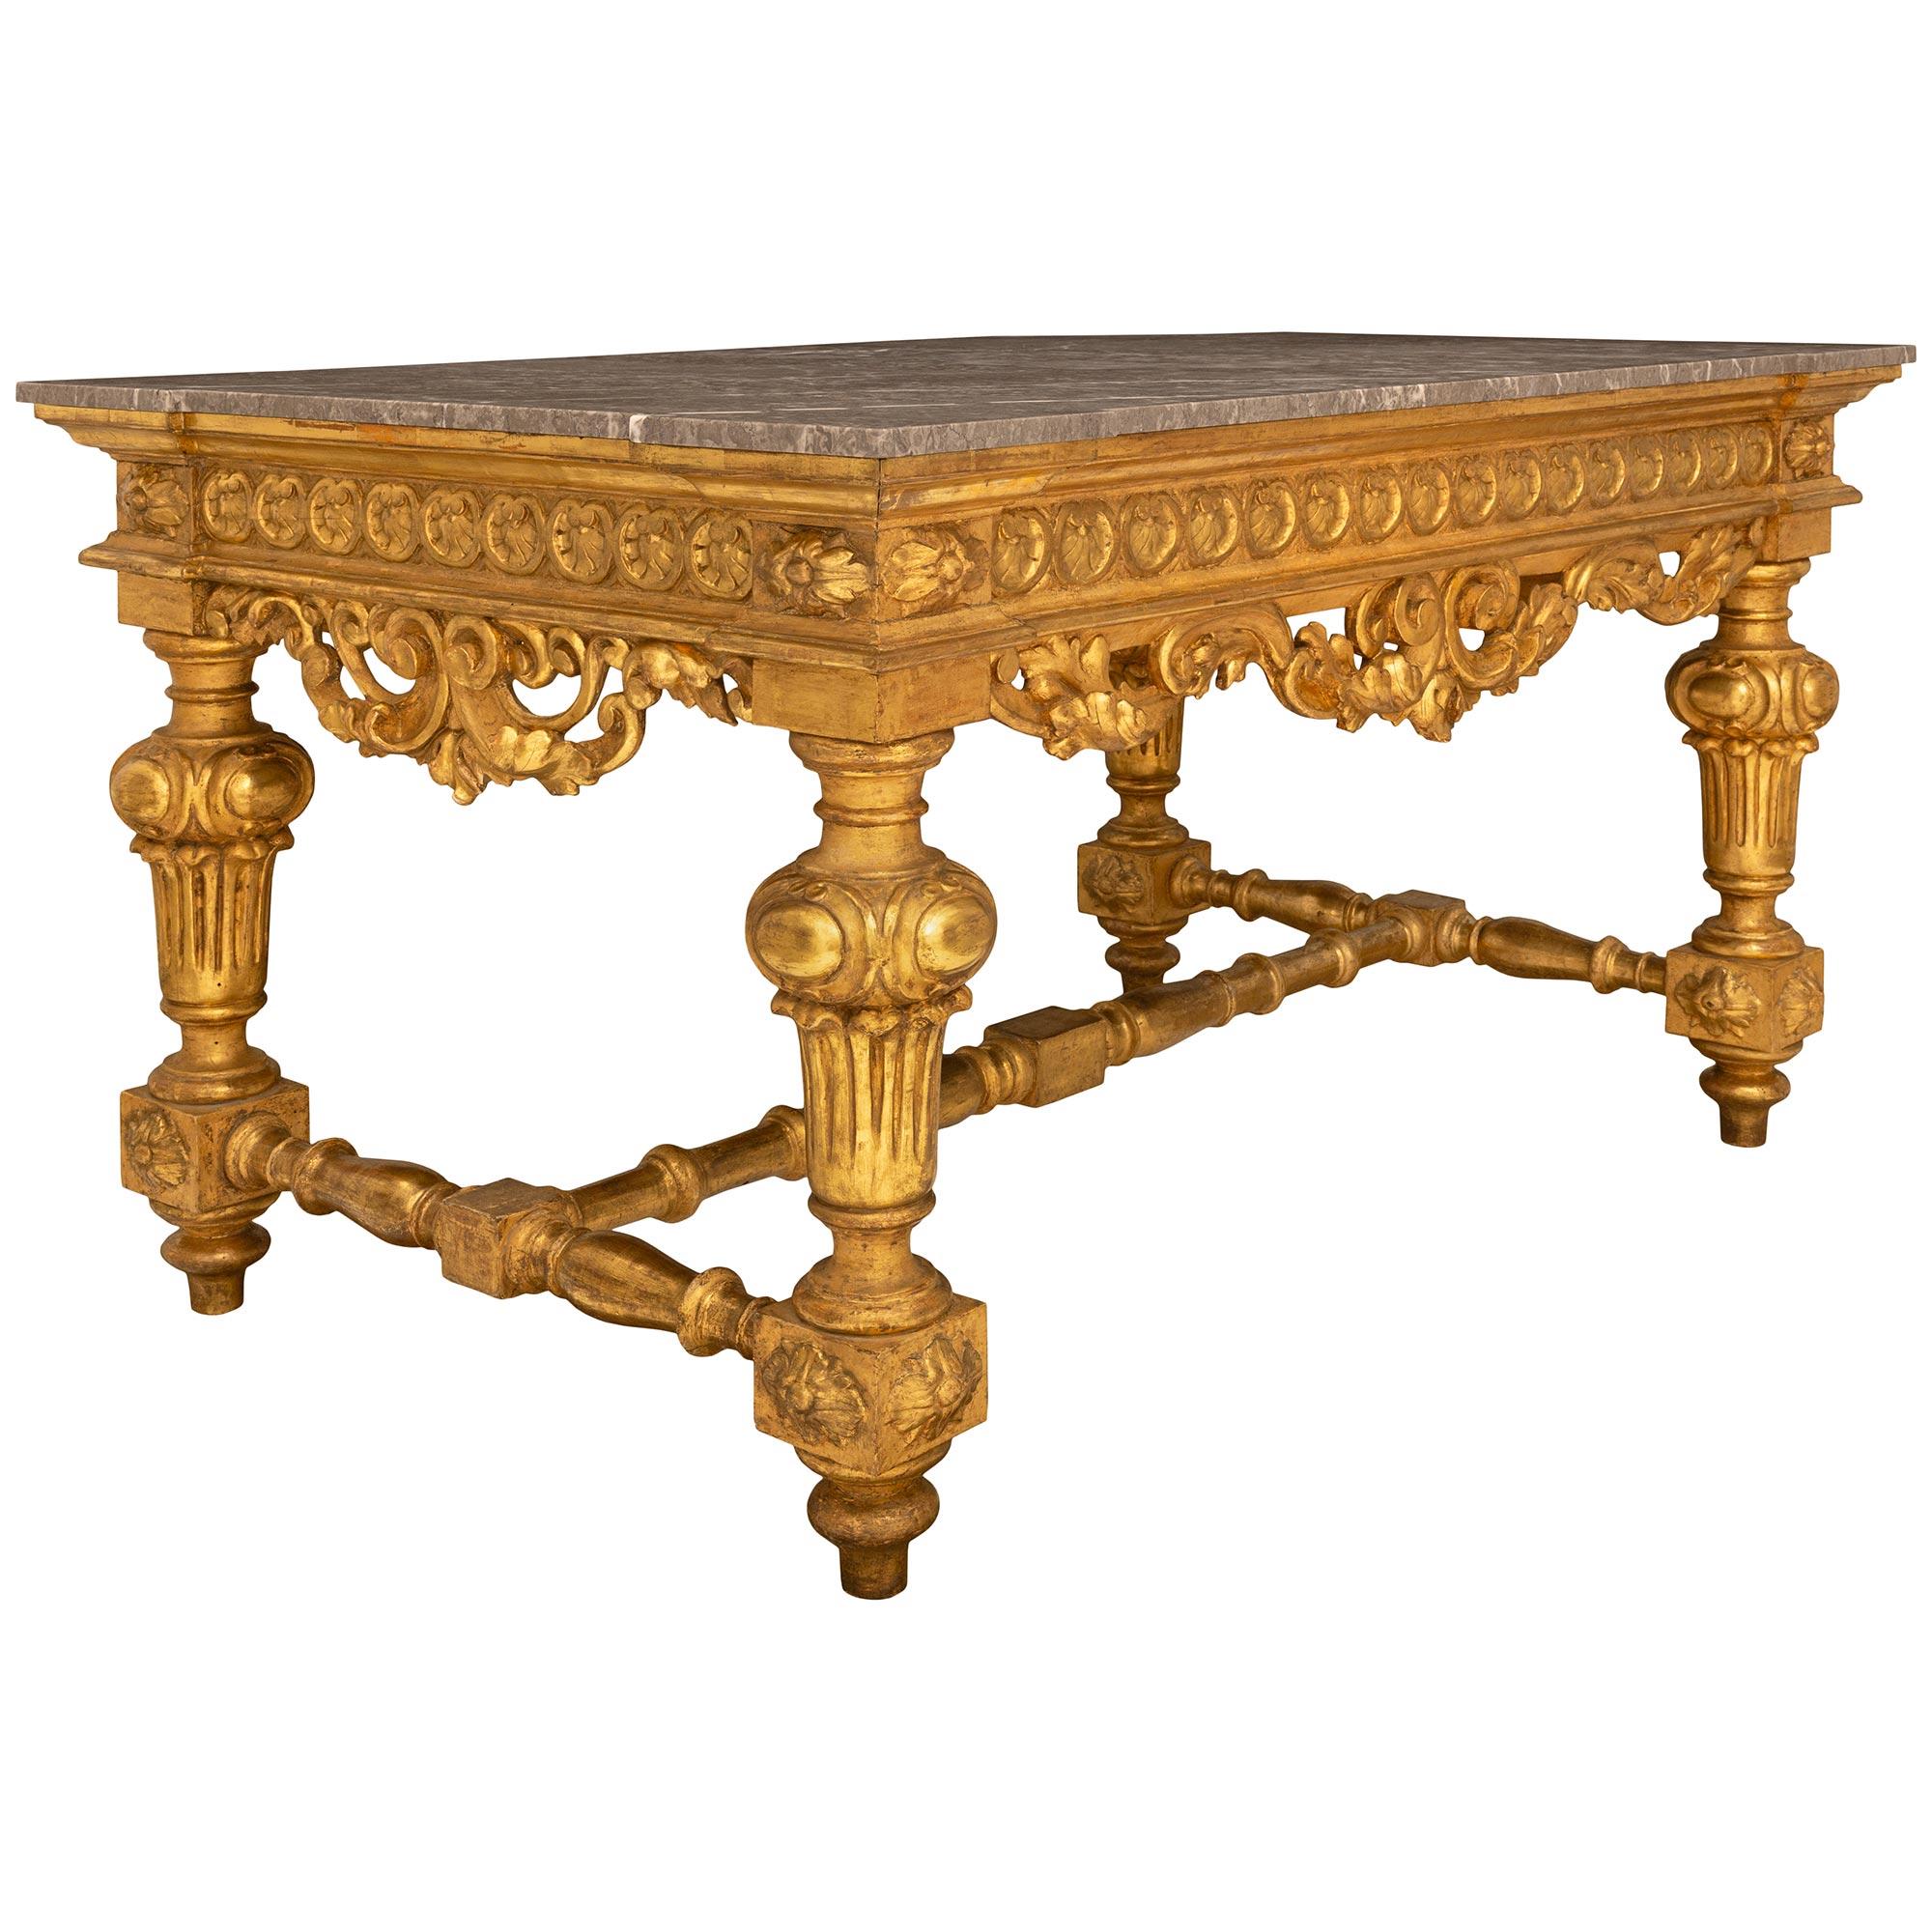 An impressive and large scale Italian early 19th century Louis XIV st. Giltwood and grey marble center table. The rectangular table is finished on all sides and is raised on fine topie shaped supports below the baluster shaped legs decorated with